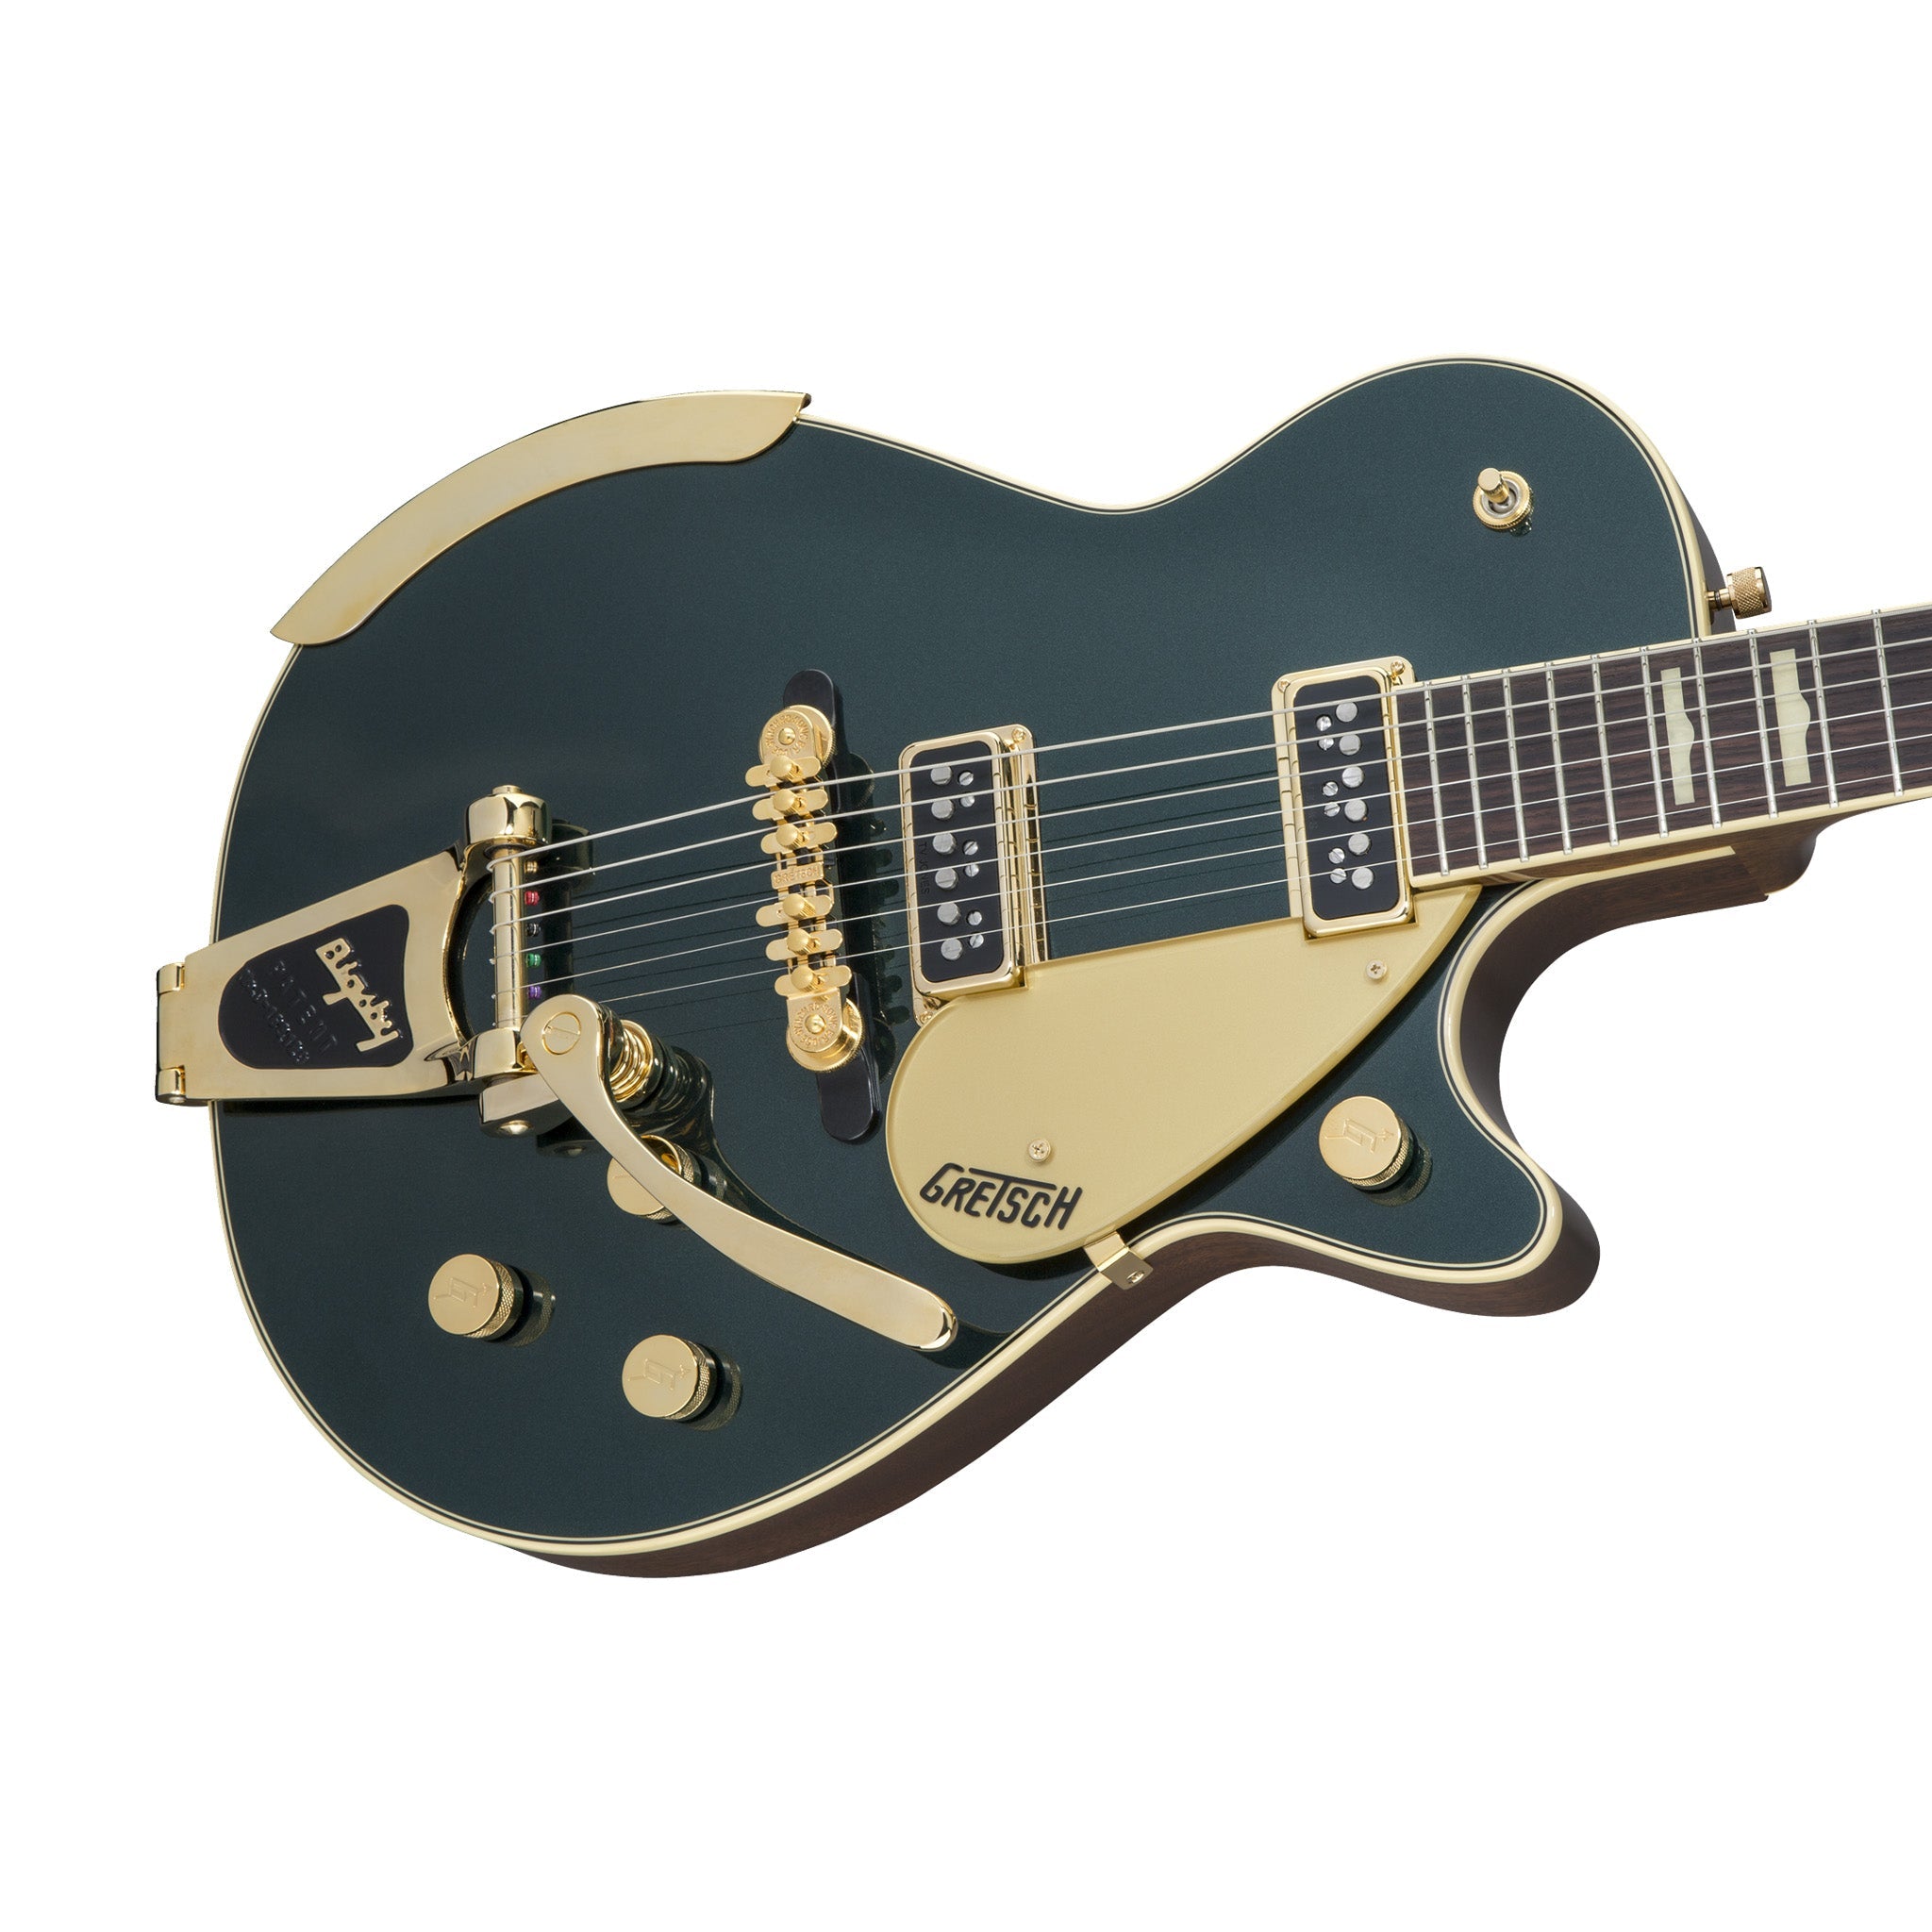 Gretsch G6128T-57 Vintage Select 57 Duo Jet Electric Guitar w/Bigsby, Cadillac Green